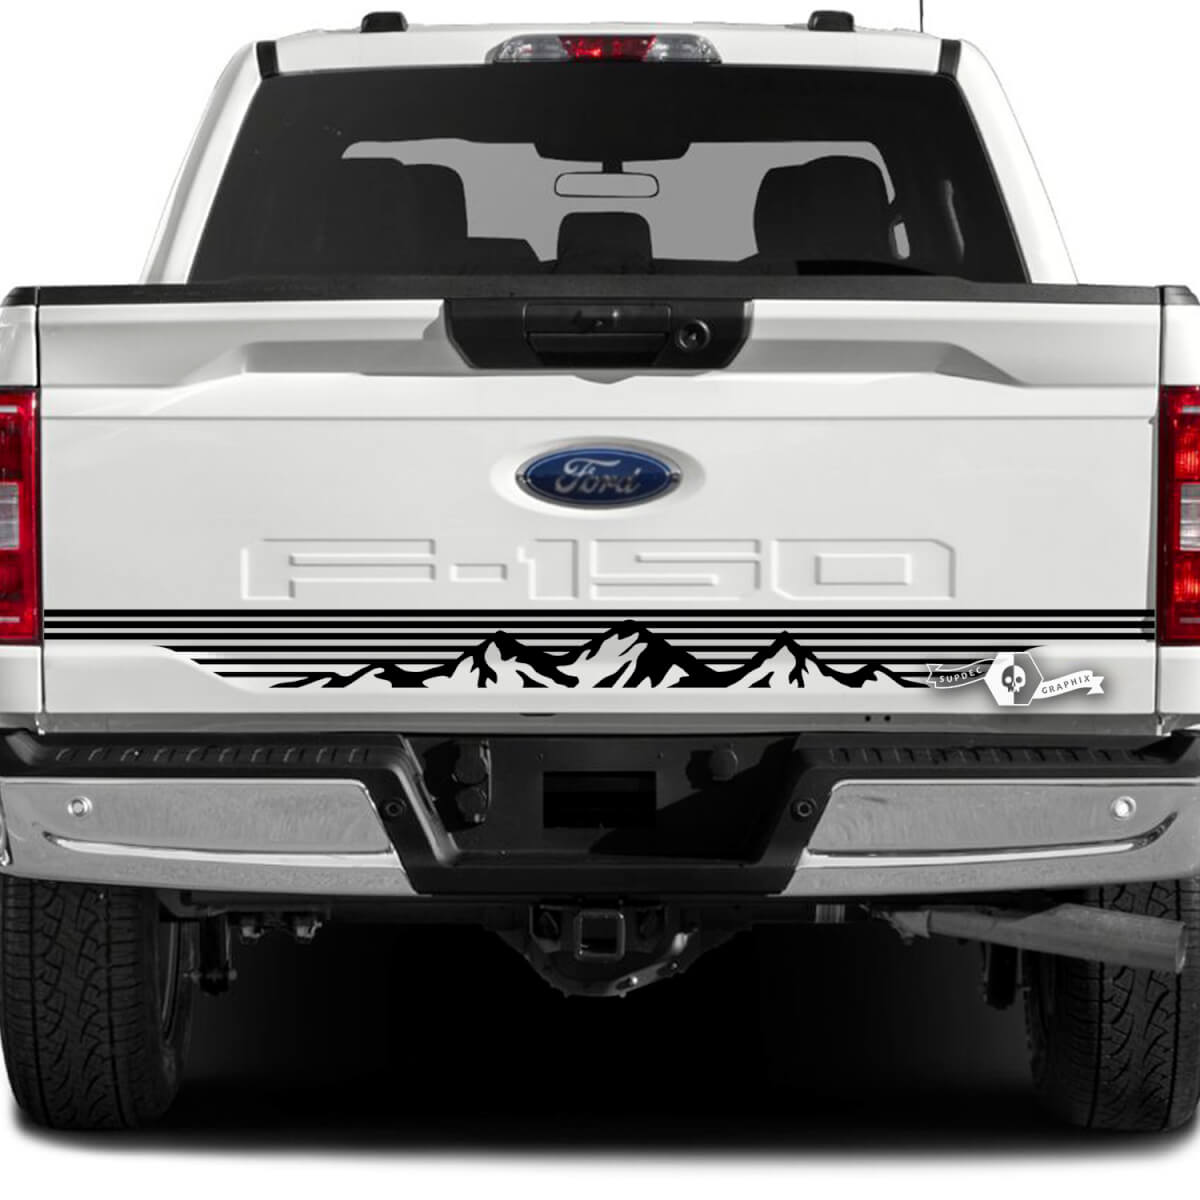 Ford F-150 XLT Tailgate Stripe Mountains Shadow Graphics Side Decals Aufkleber
